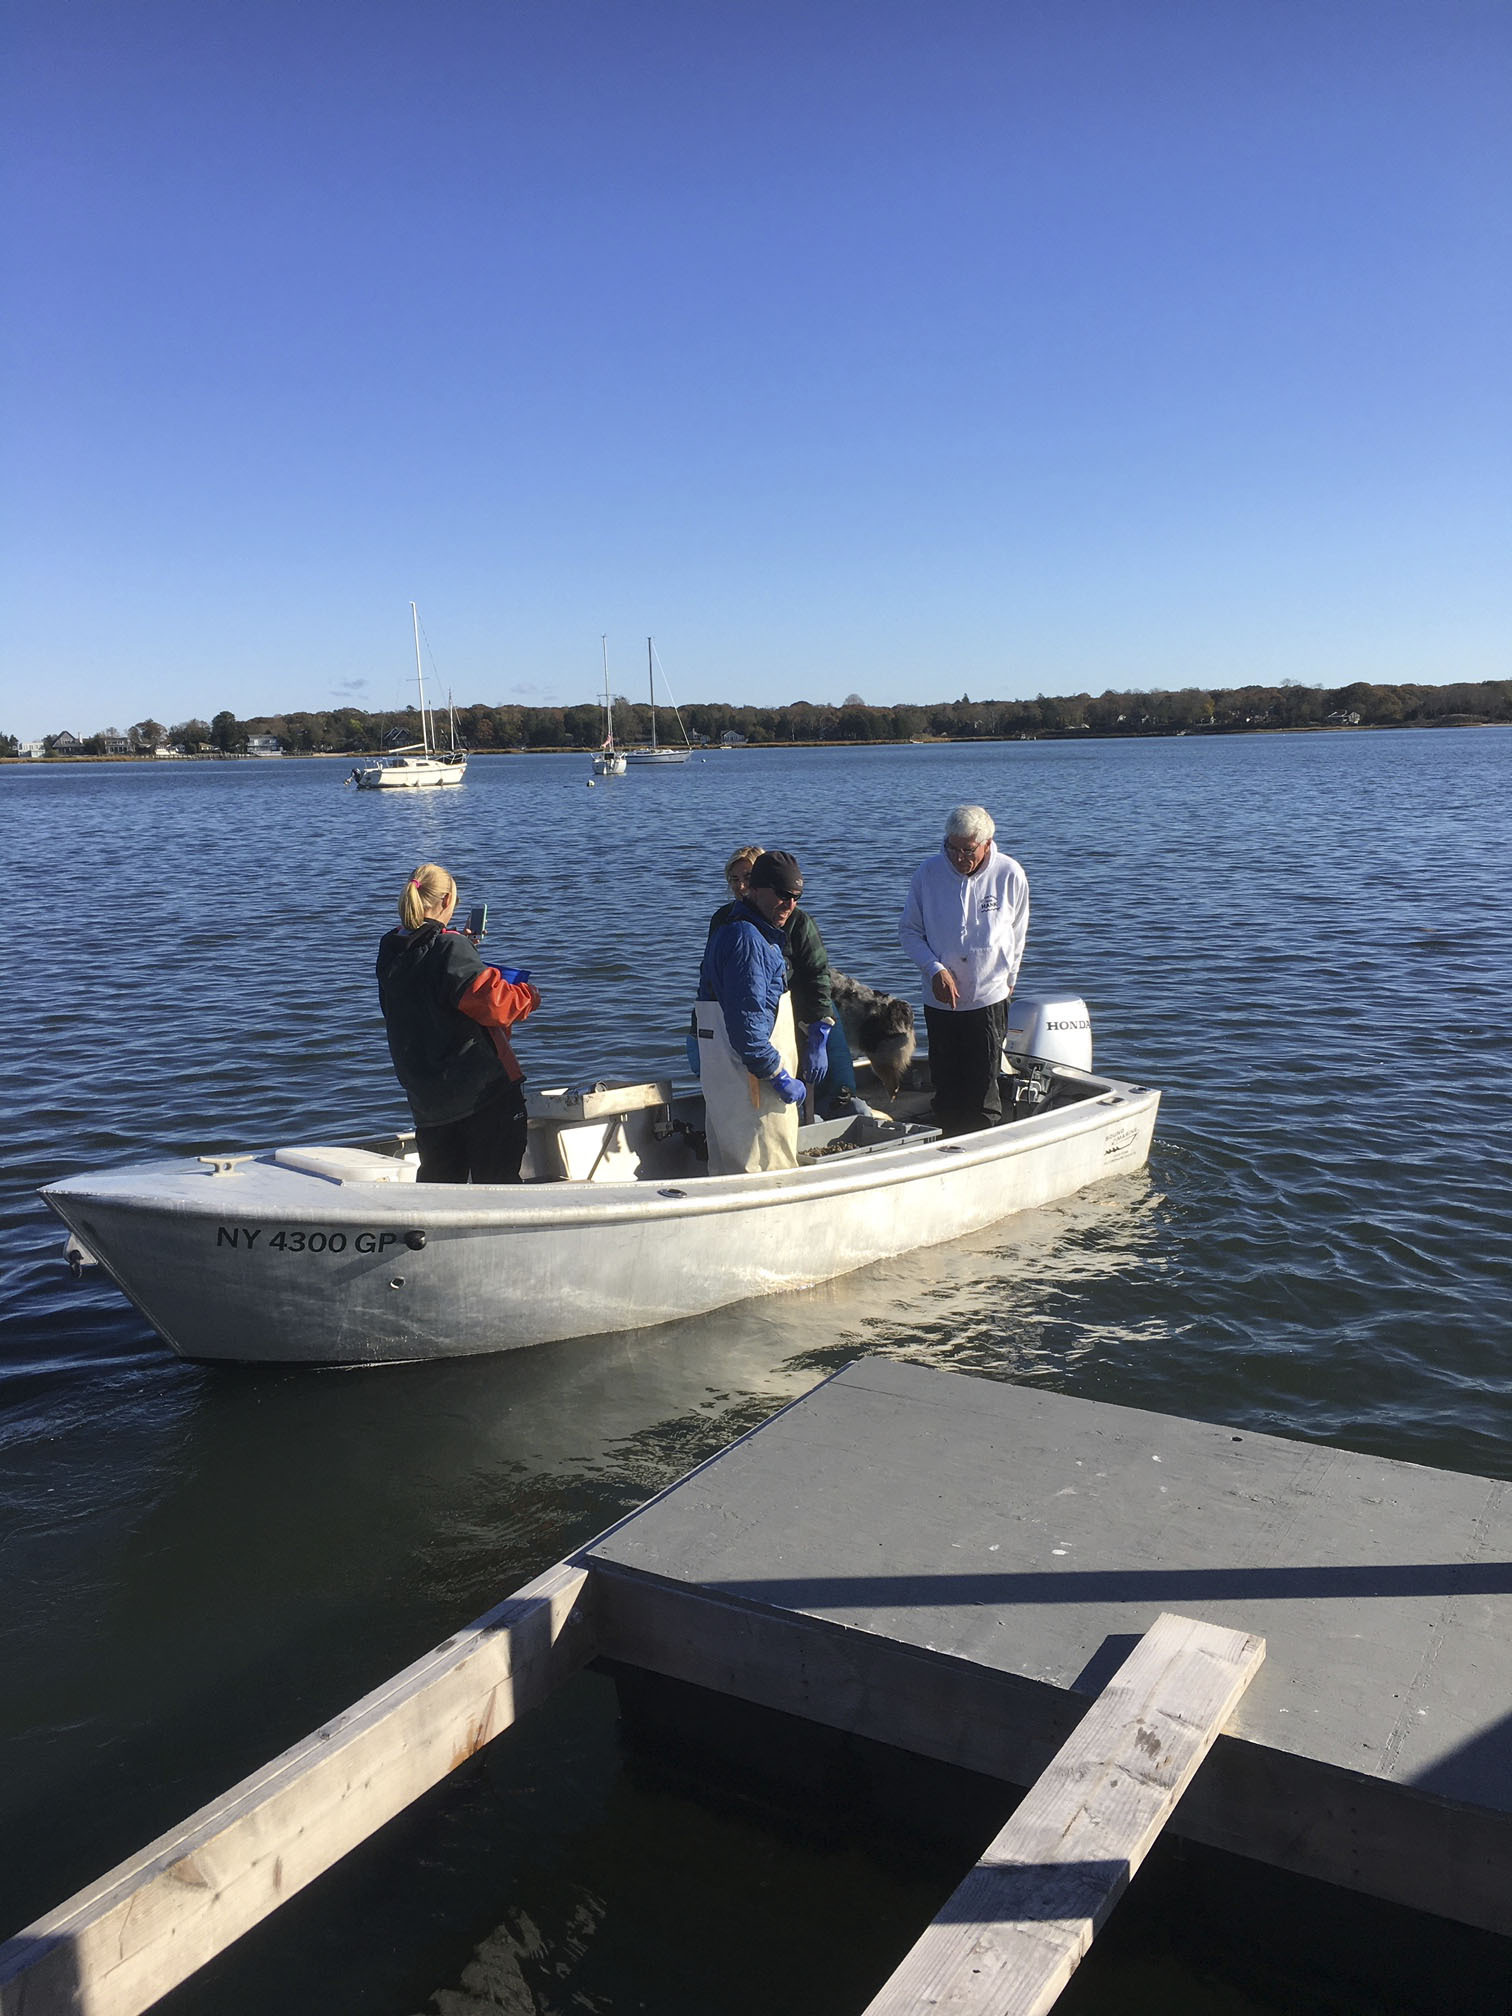 CPS Board Member Connie Claman, CPS Vice President Barley Dunne, Ashley Oliver, CPS Board Member Donna Olsen and Southampton Town Trustee Bill Pell head out into the bay to seed oysters.   COURTESY ASHLEY OLIVER